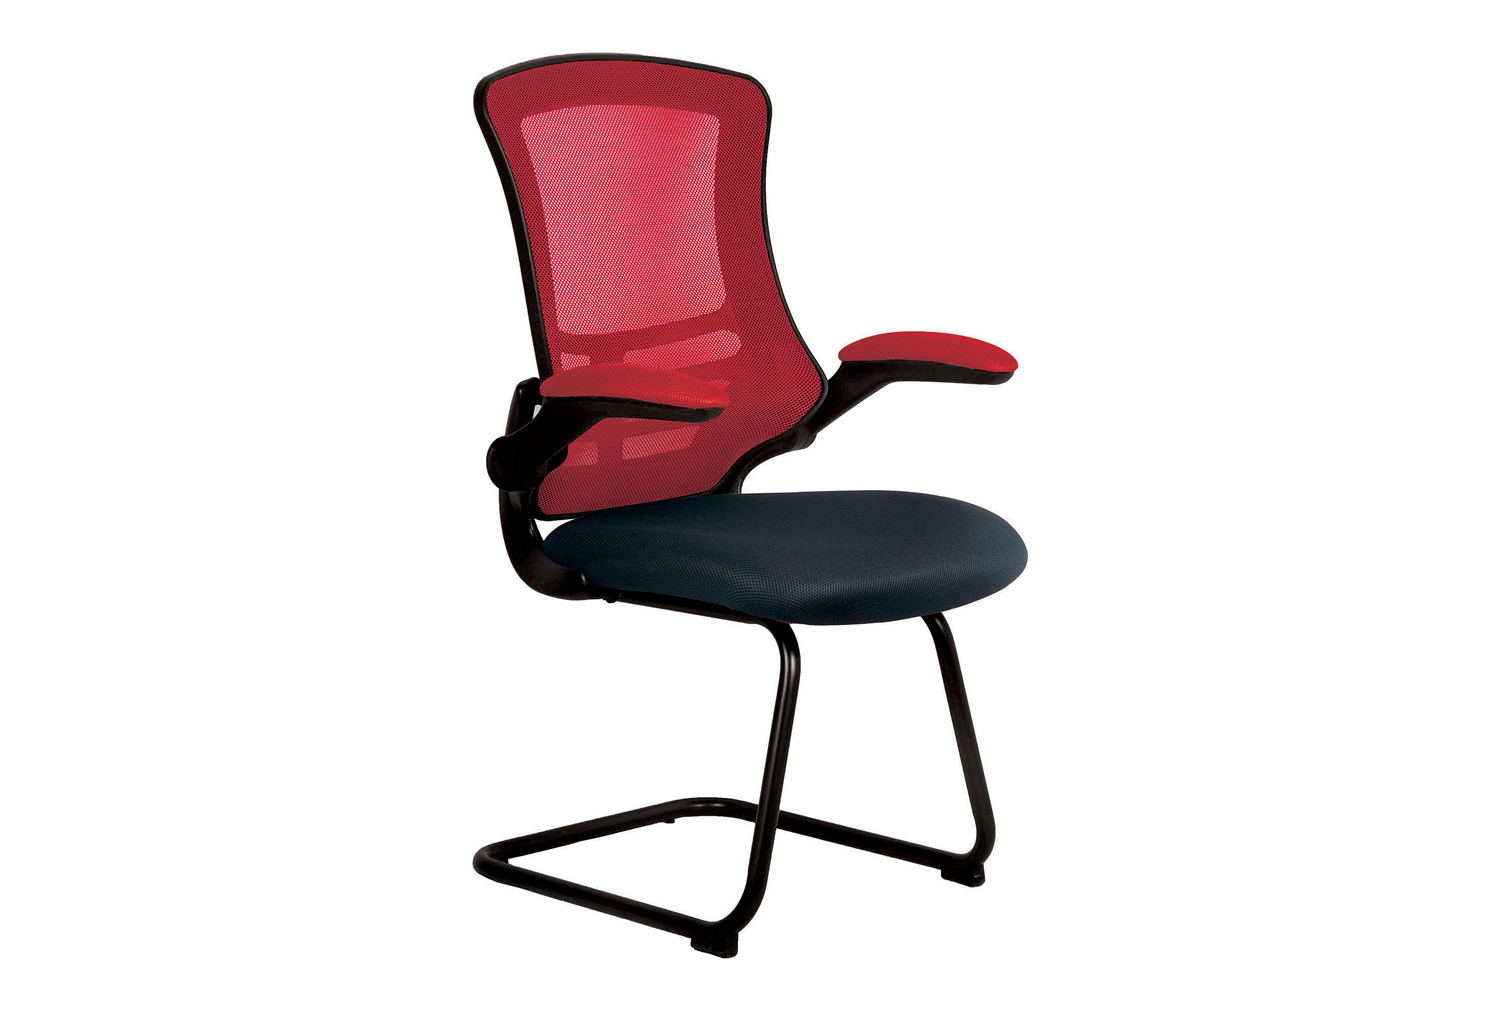 Moon Mesh Back Cantilever Office Chair With Black Frame (Red/Black), Fuly Installed